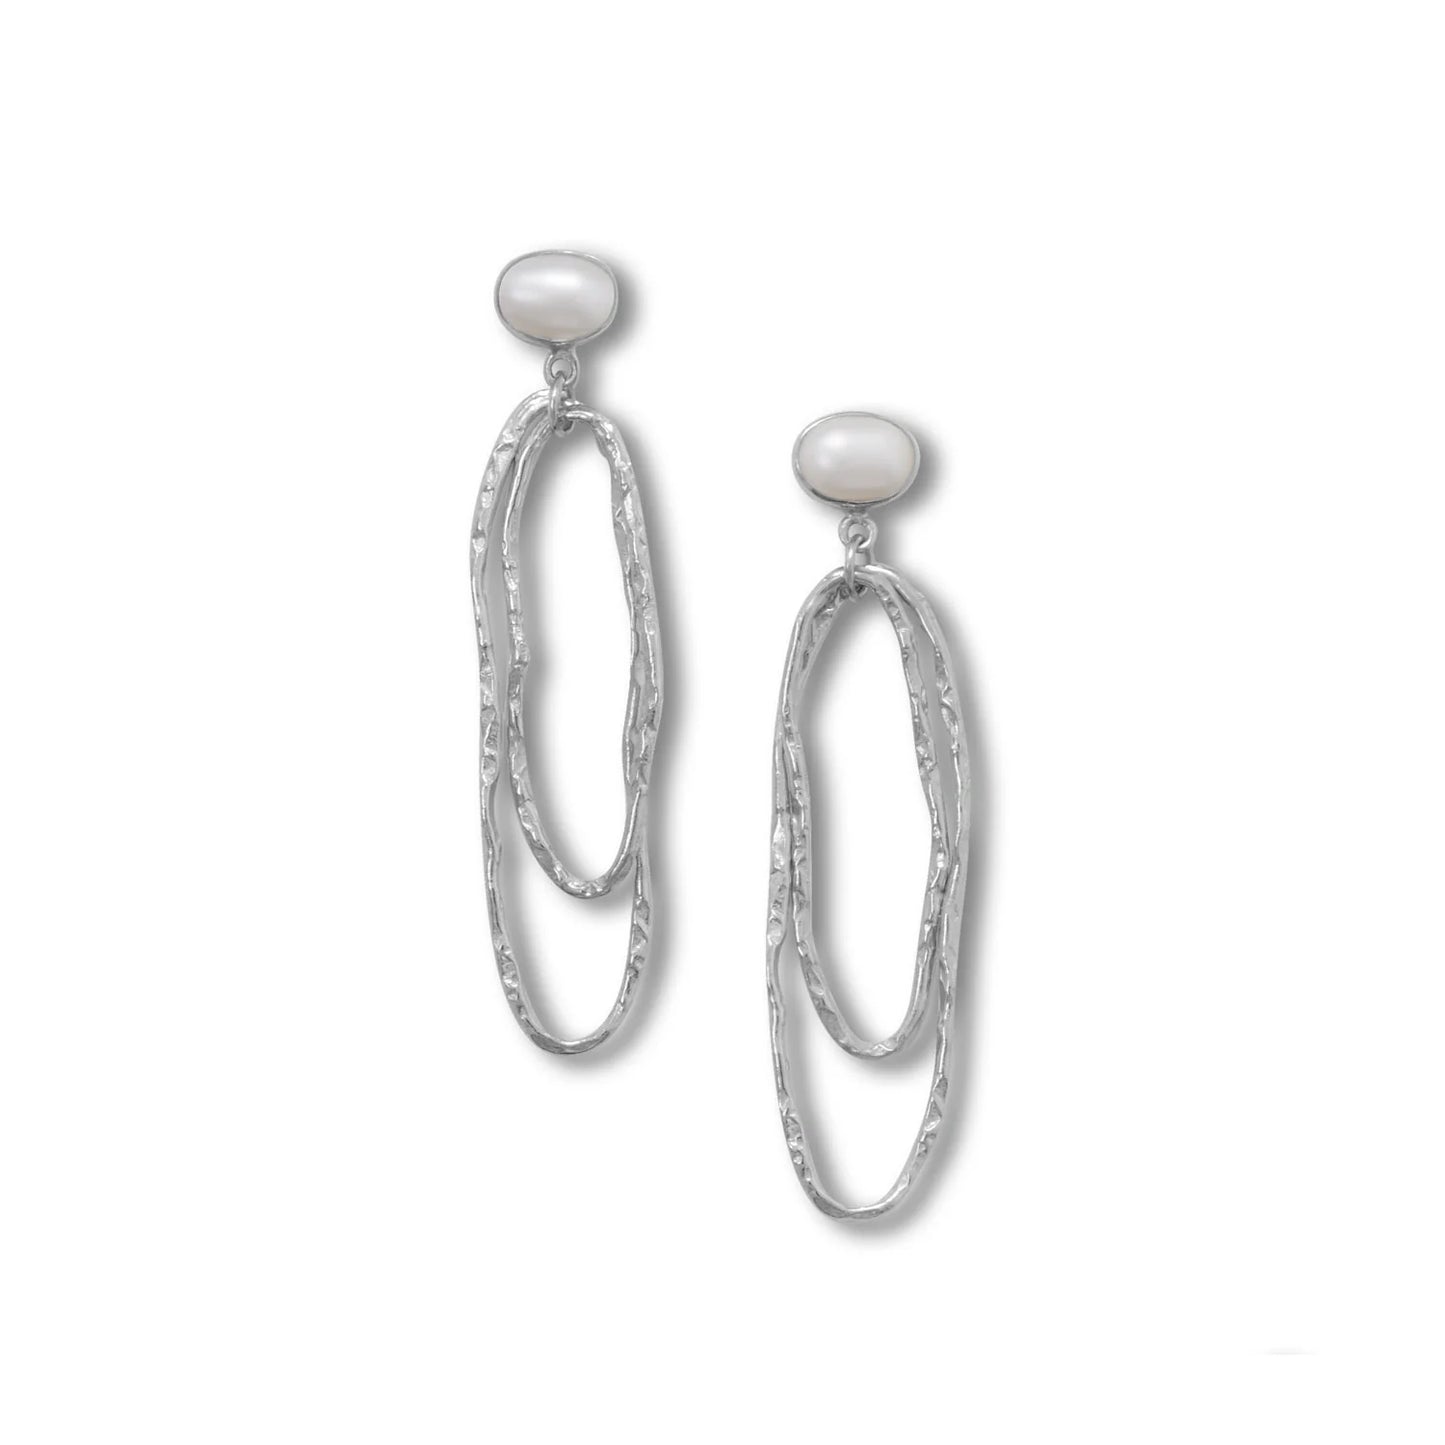 Rhodium Plated Drop Earrings With Cultured Freshwater Pearls